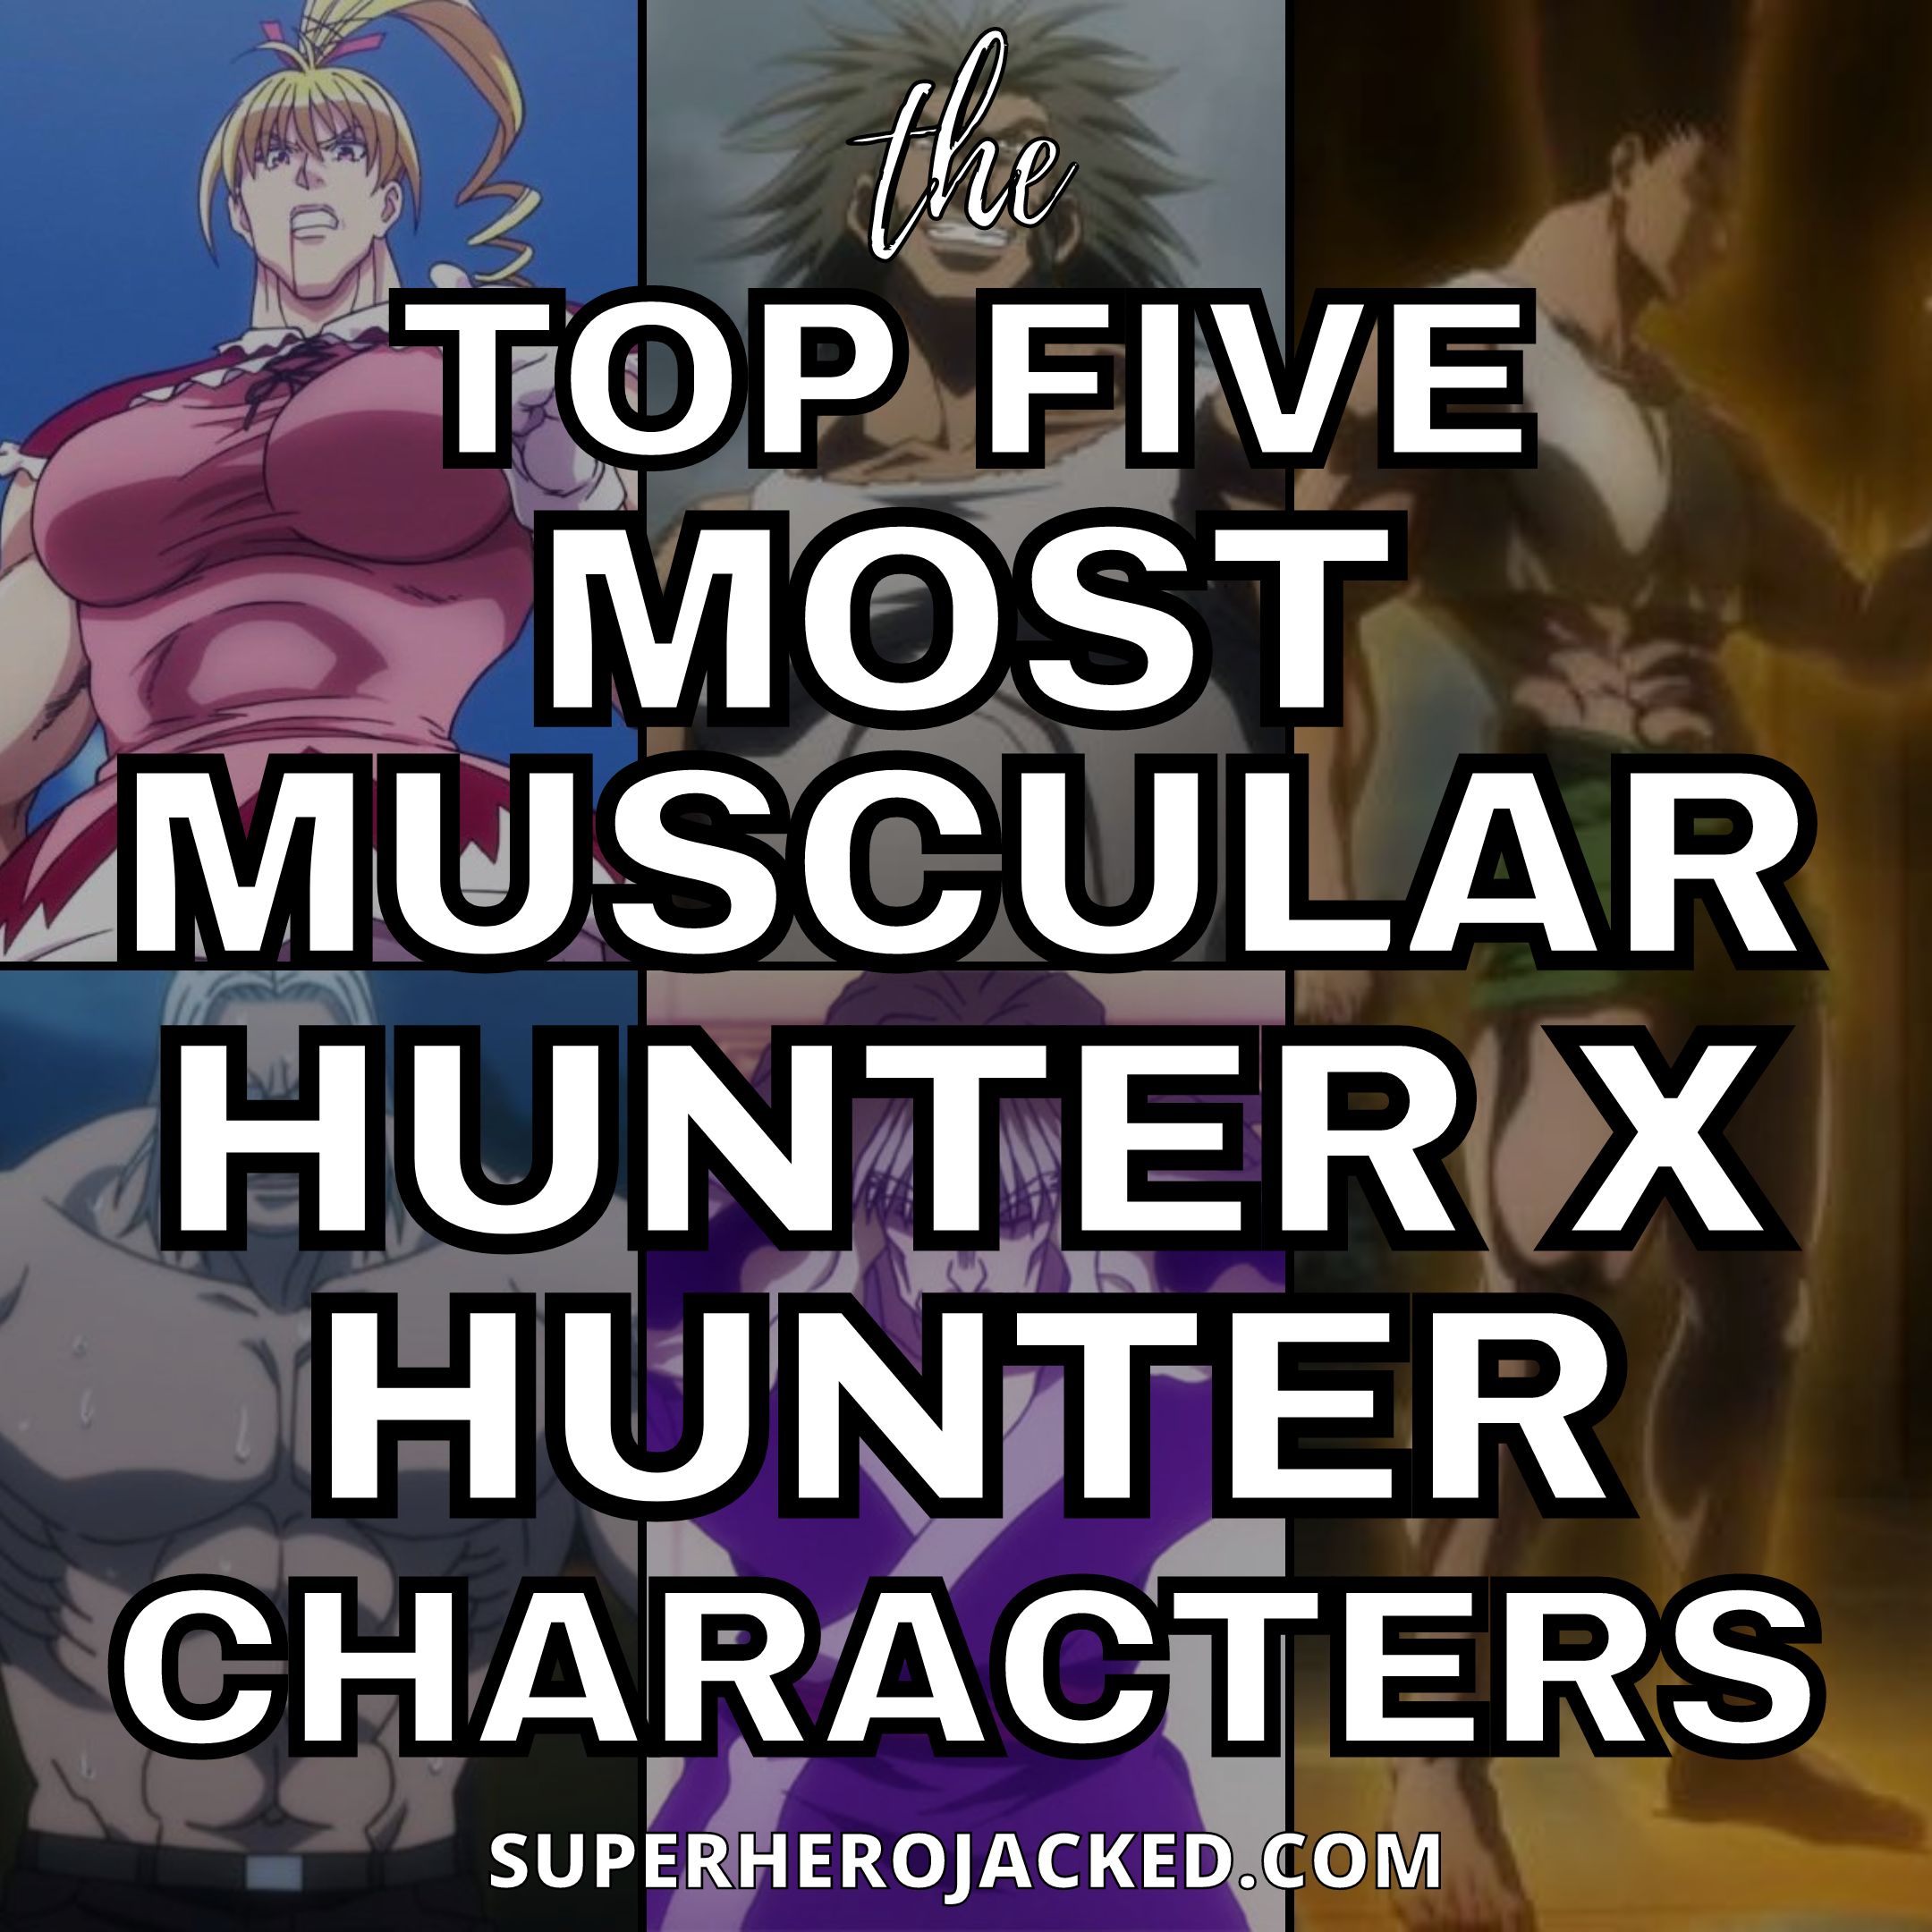 The Top Five Most Muscular Hunter X Hunter Characters